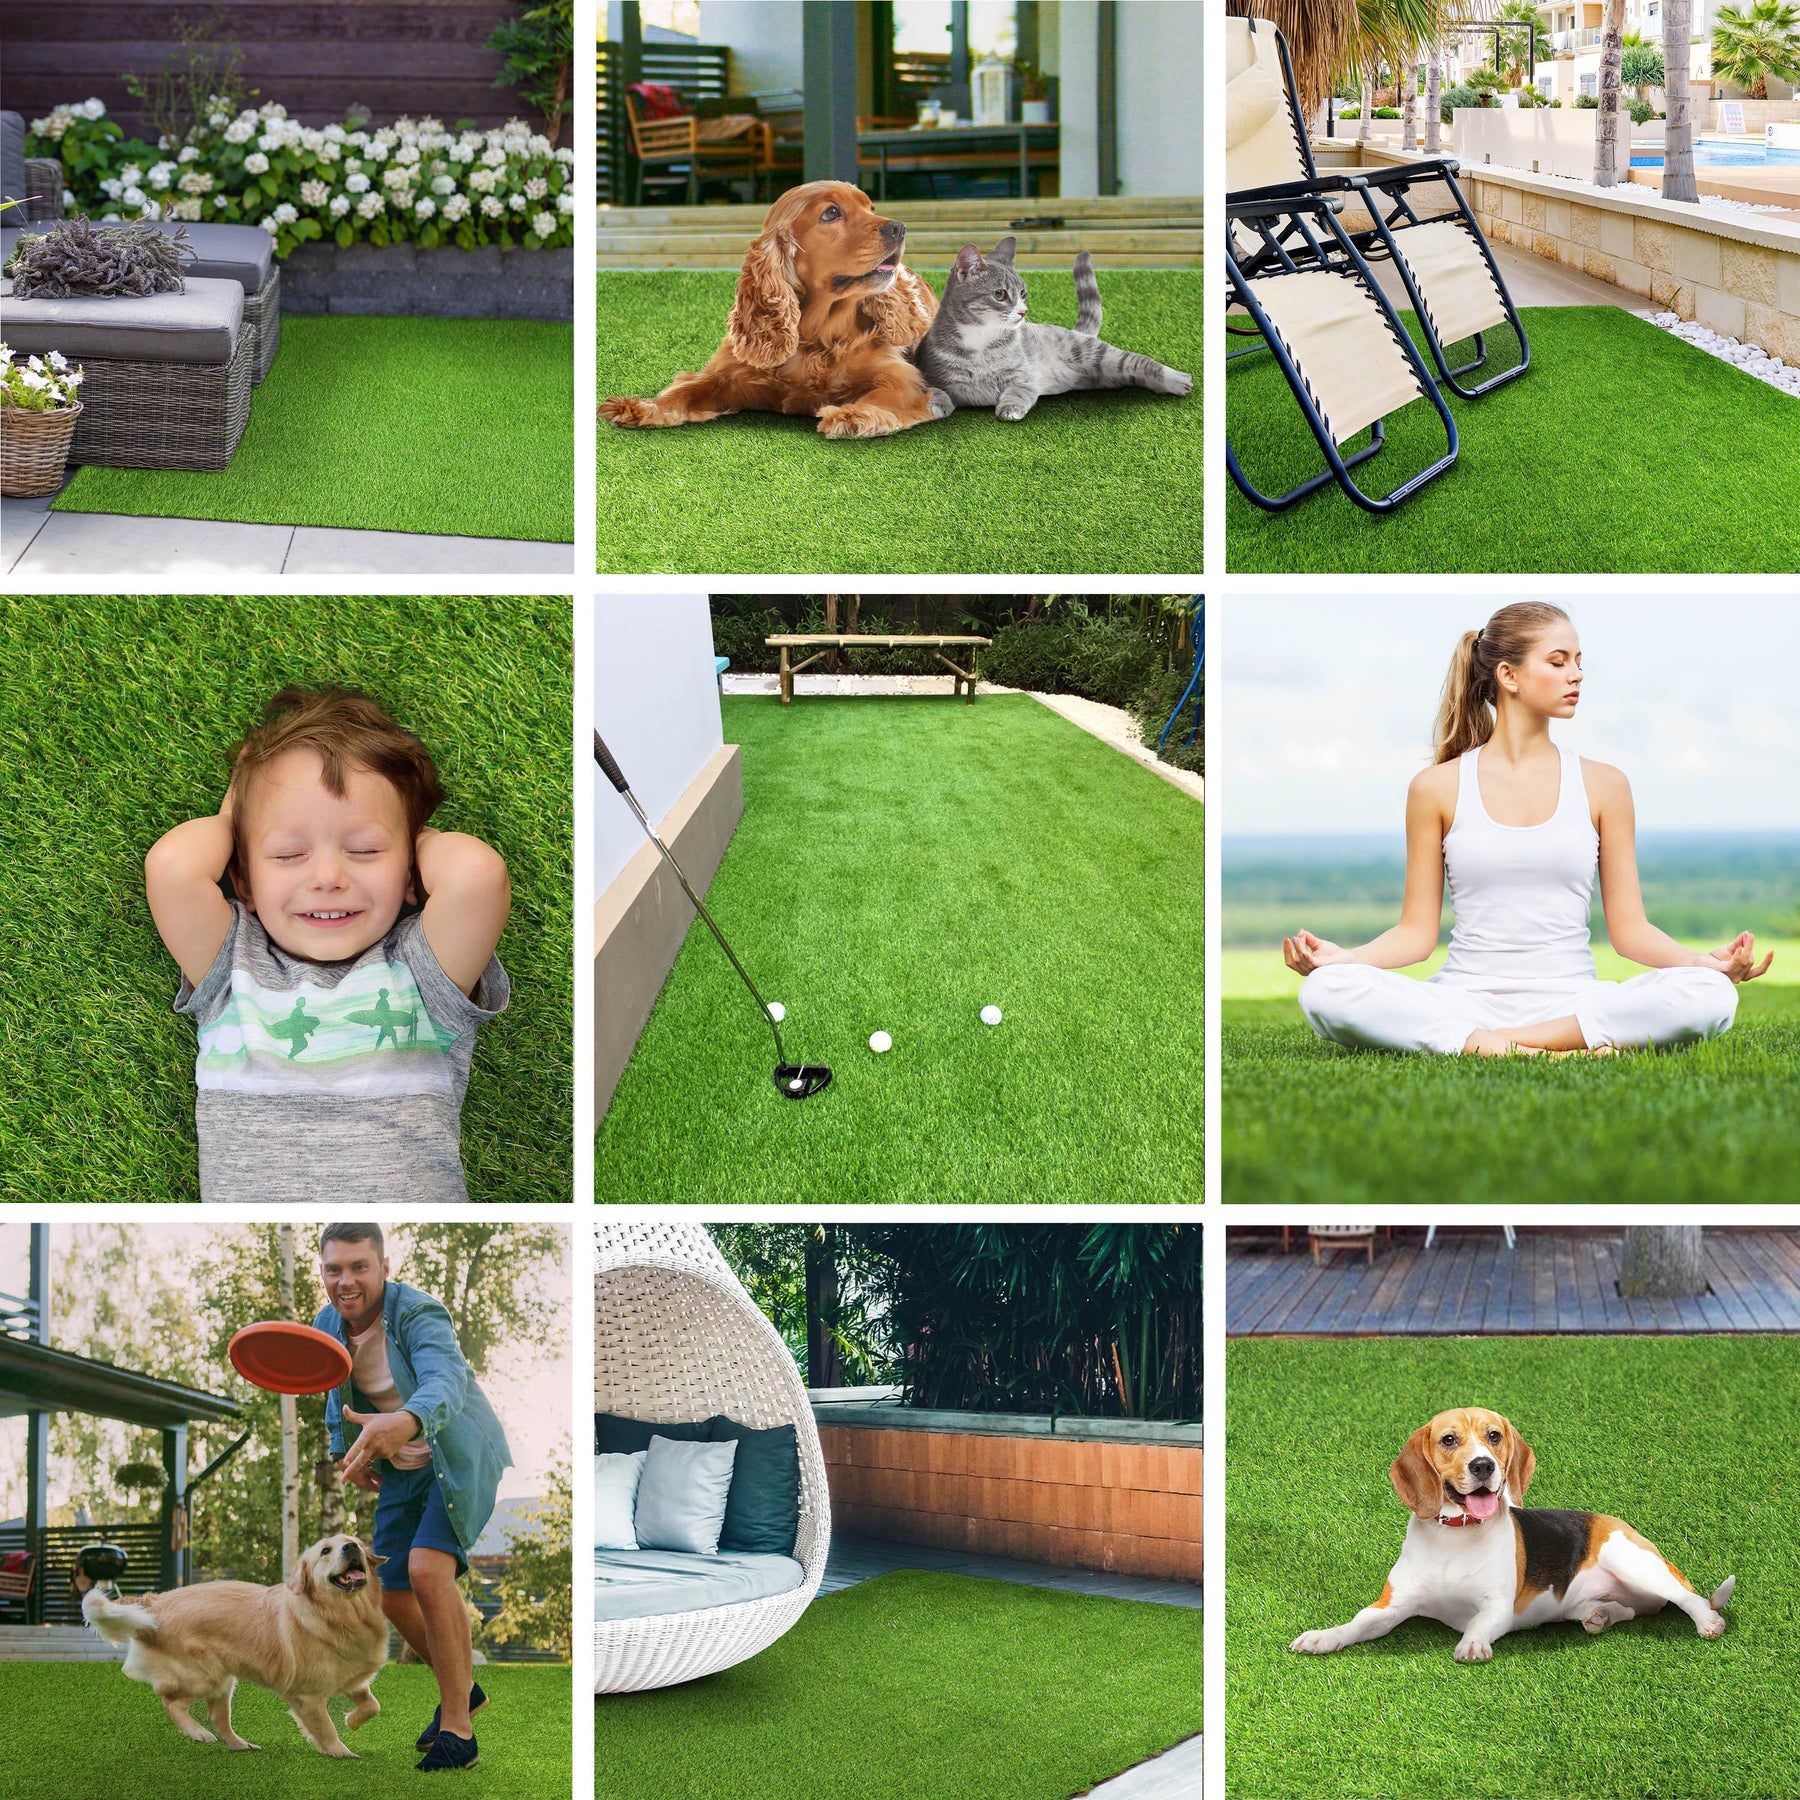 Realistic Indoor or Outdoor Artificial Grass/ Turf-Rugs by Superior-Home City Inc